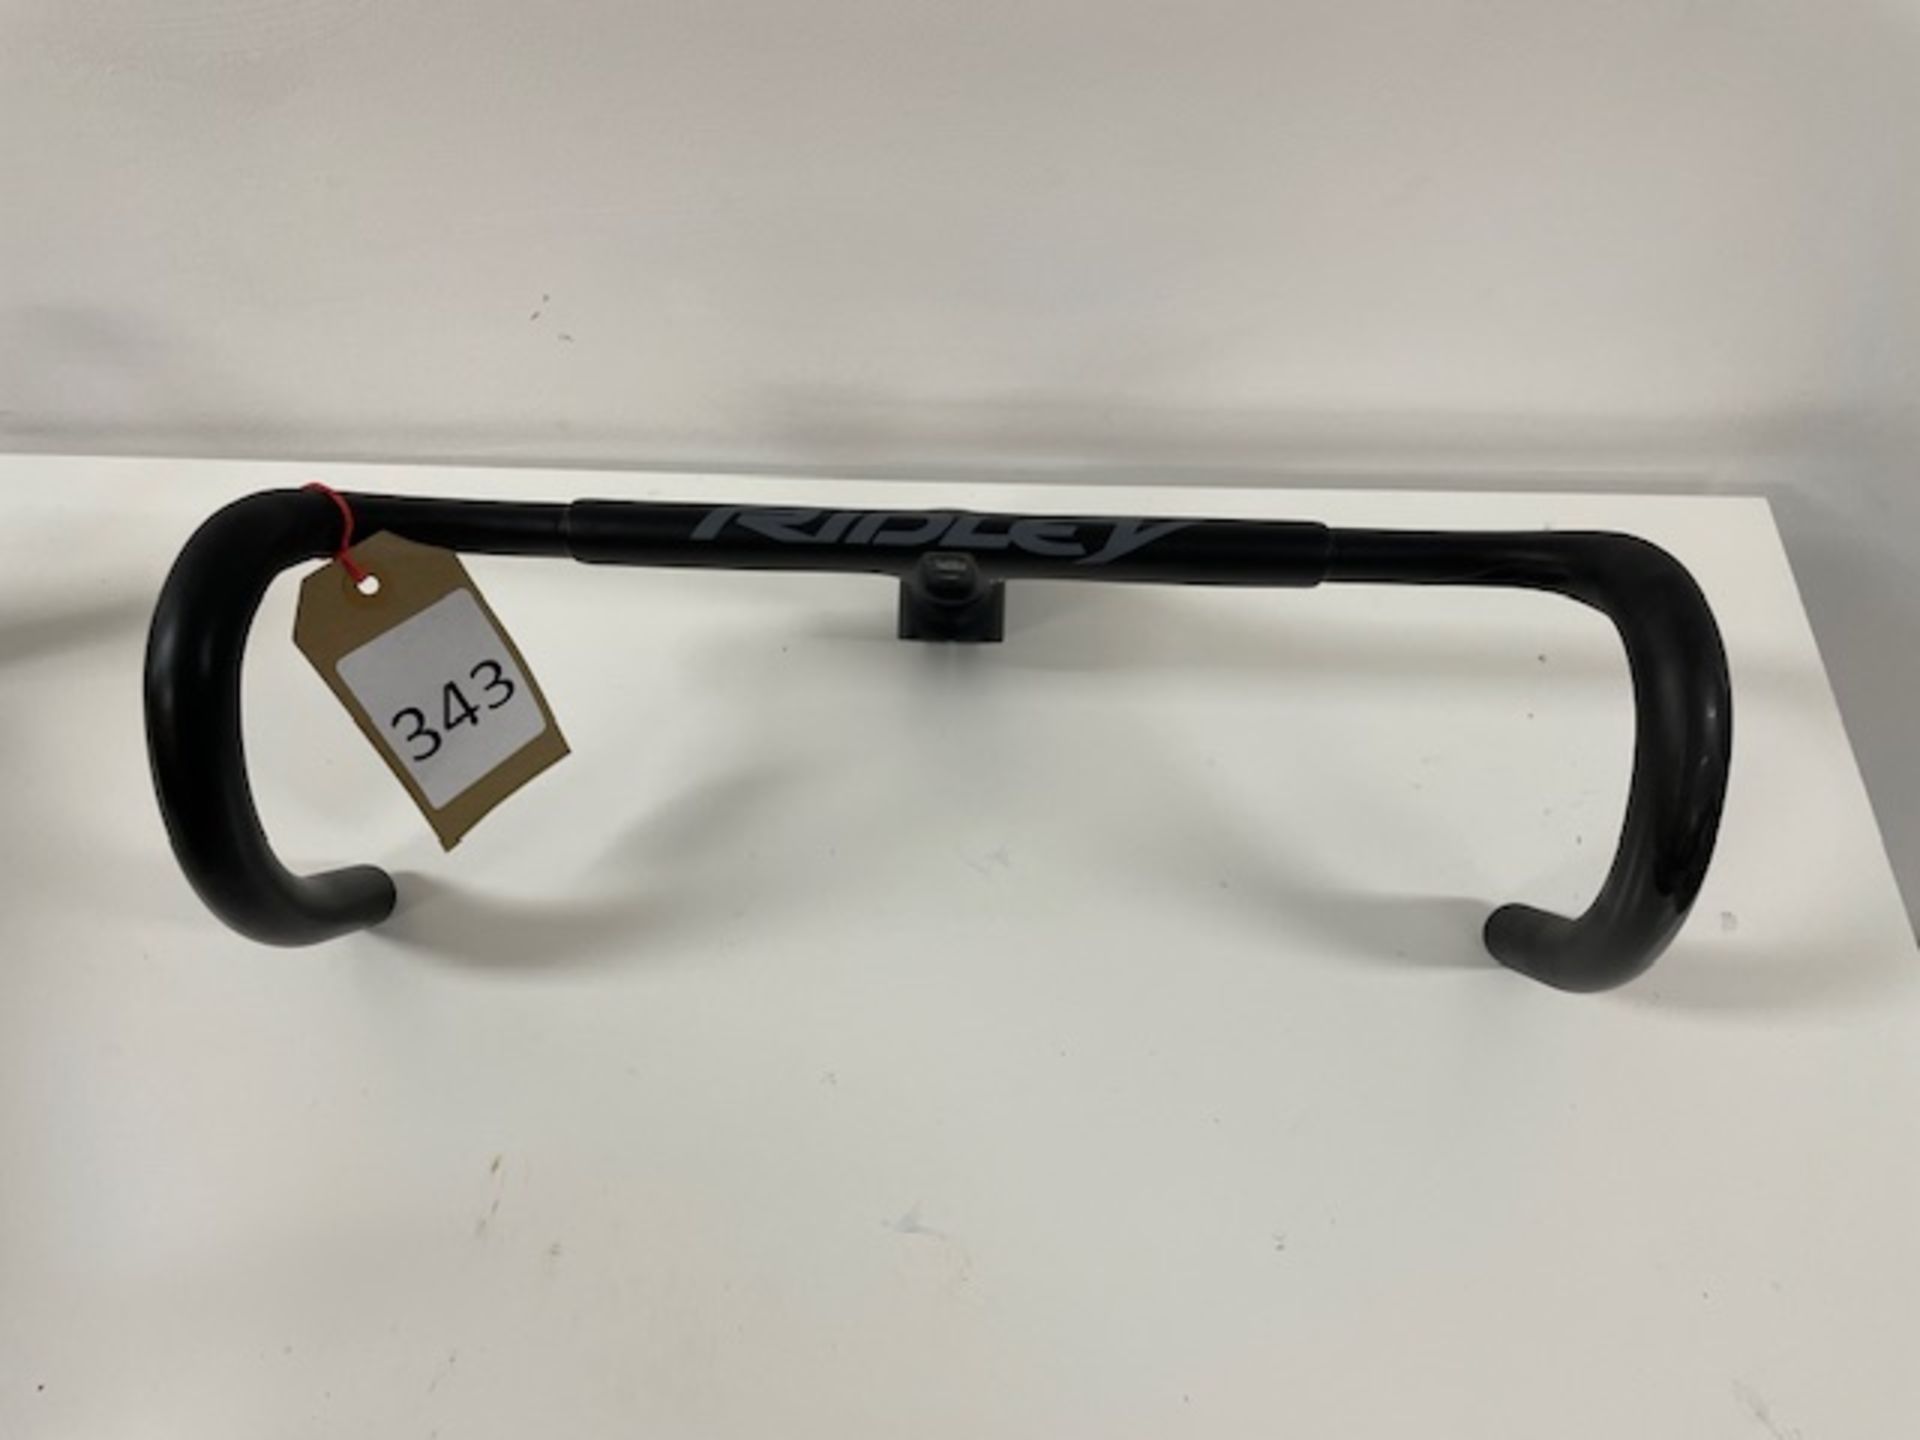 Ridley Aero N1, 400420/100 One Piece Carbon Handlebar (Location: Newport Pagnell. Please Refer to